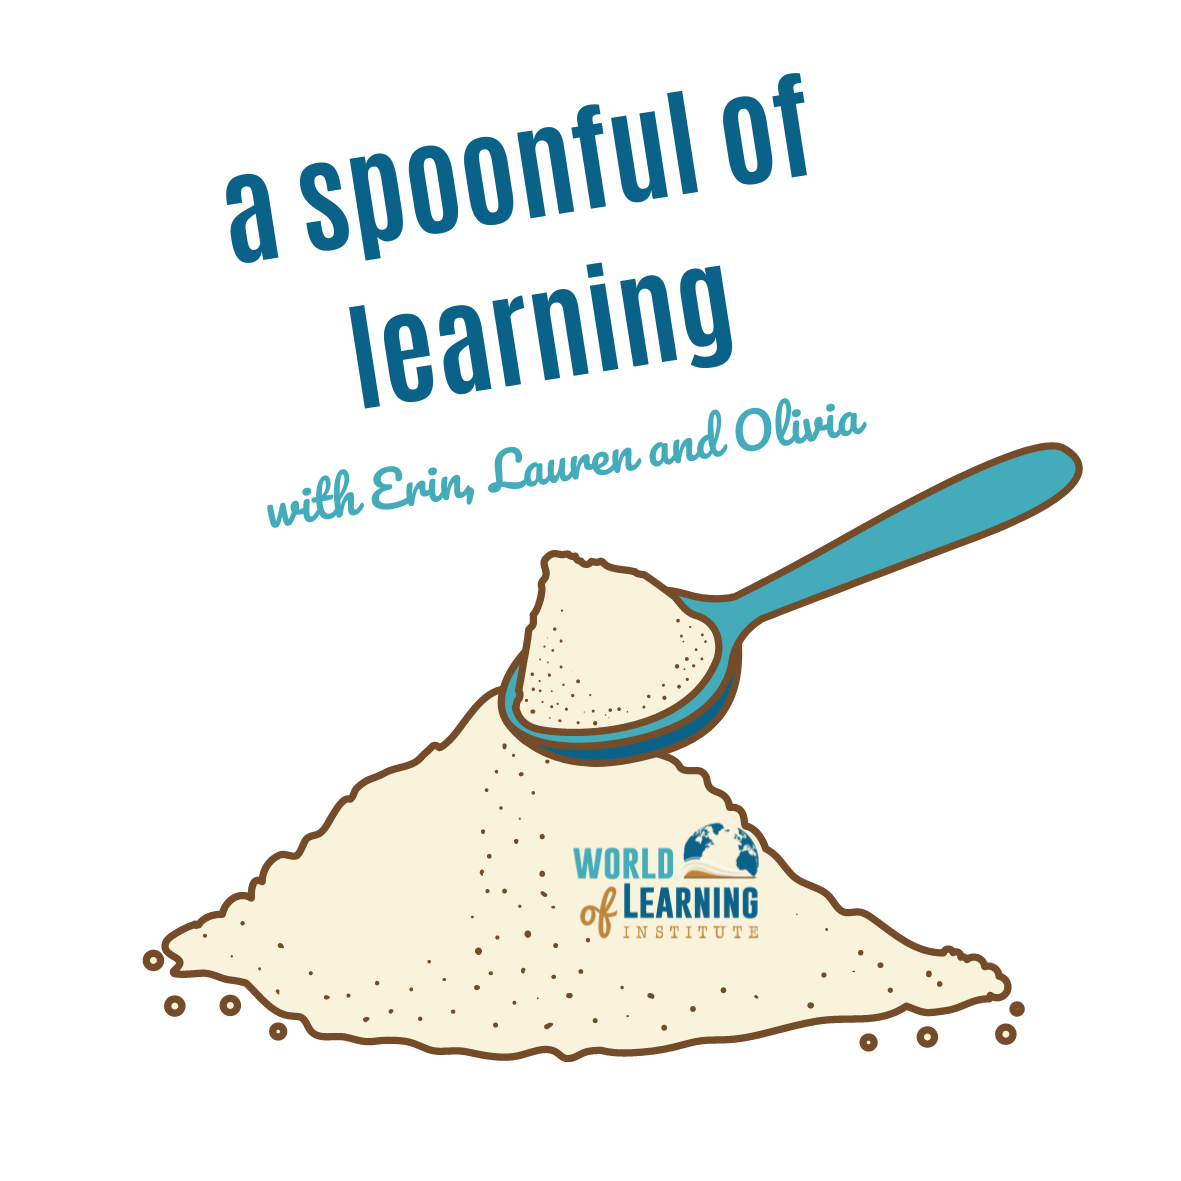 A Spoon Full of Learning